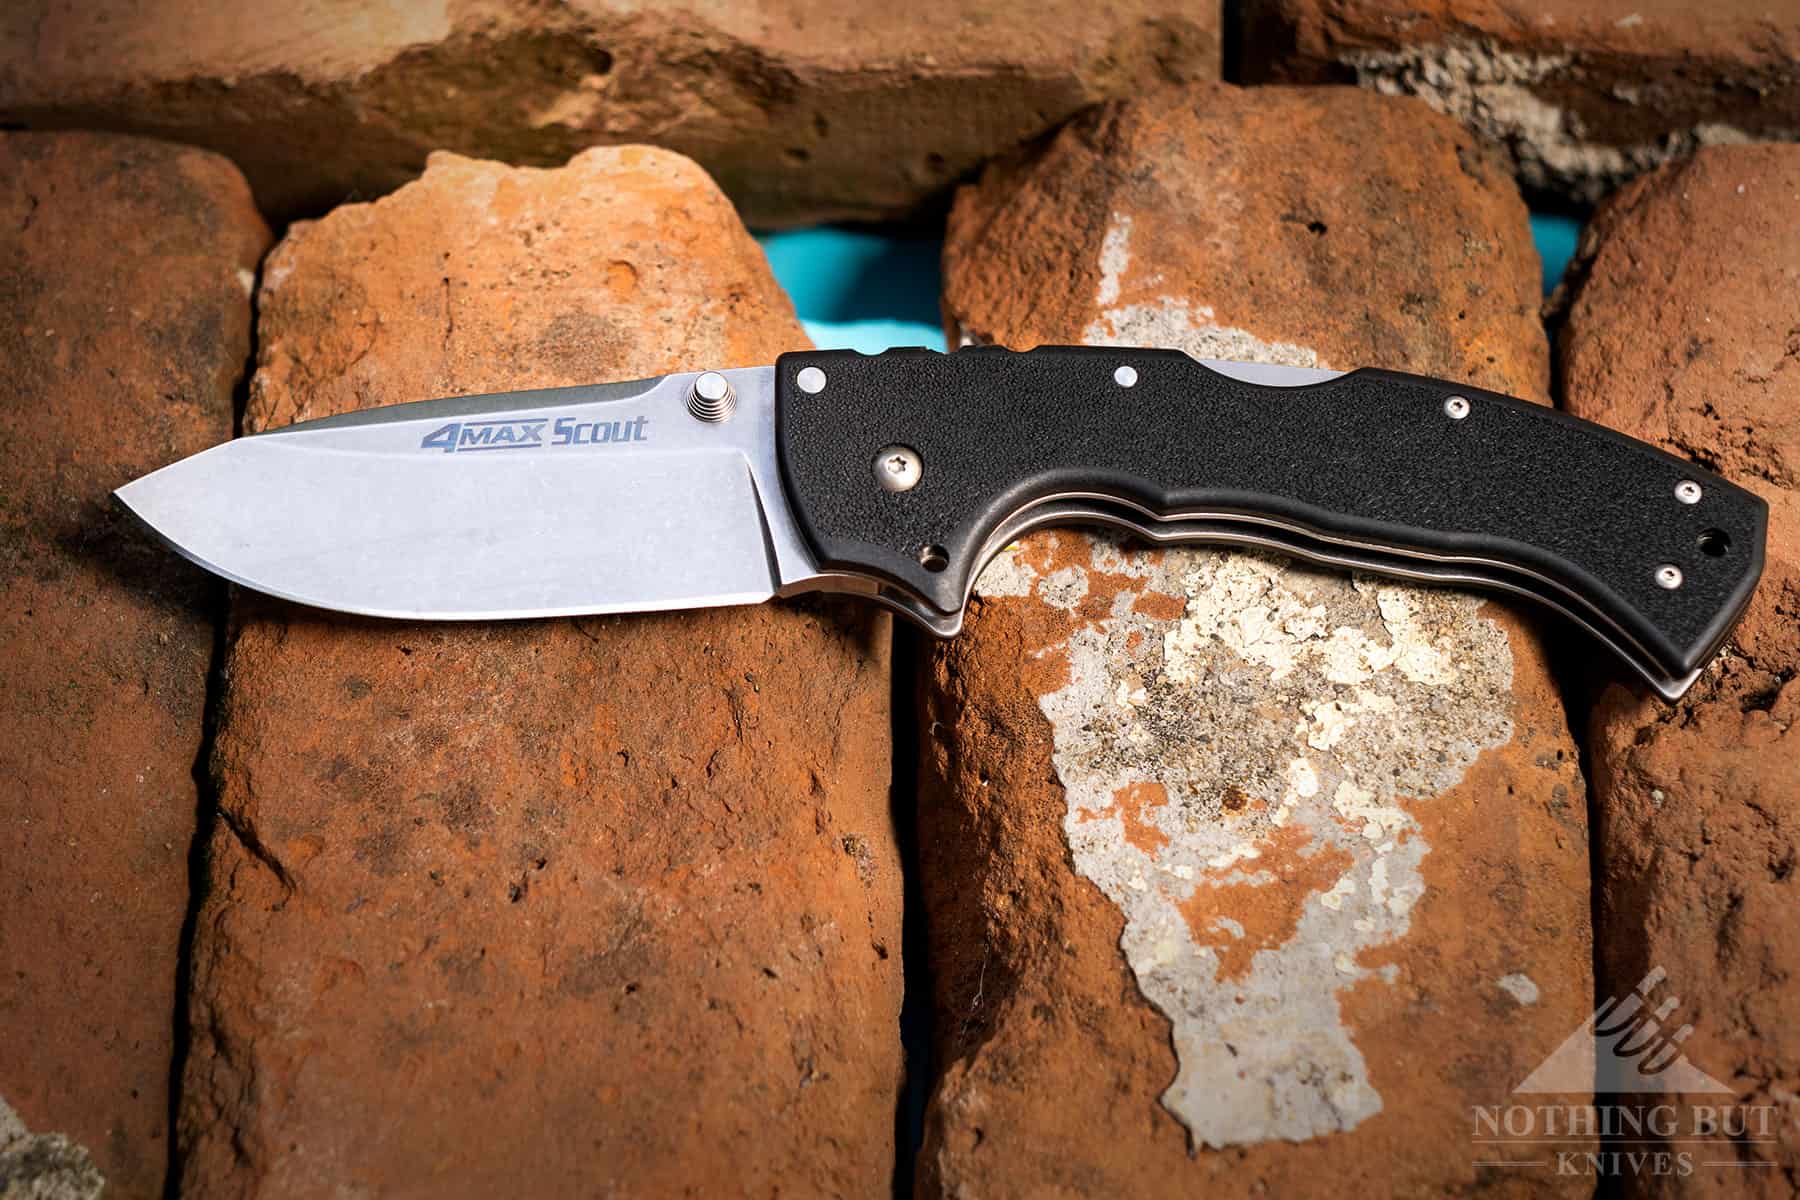 https://www.nothingbutknives.com/wp-content/uploads/2022/03/Cold-Steel-Max-Scout-Hard-Use-Knife.jpg